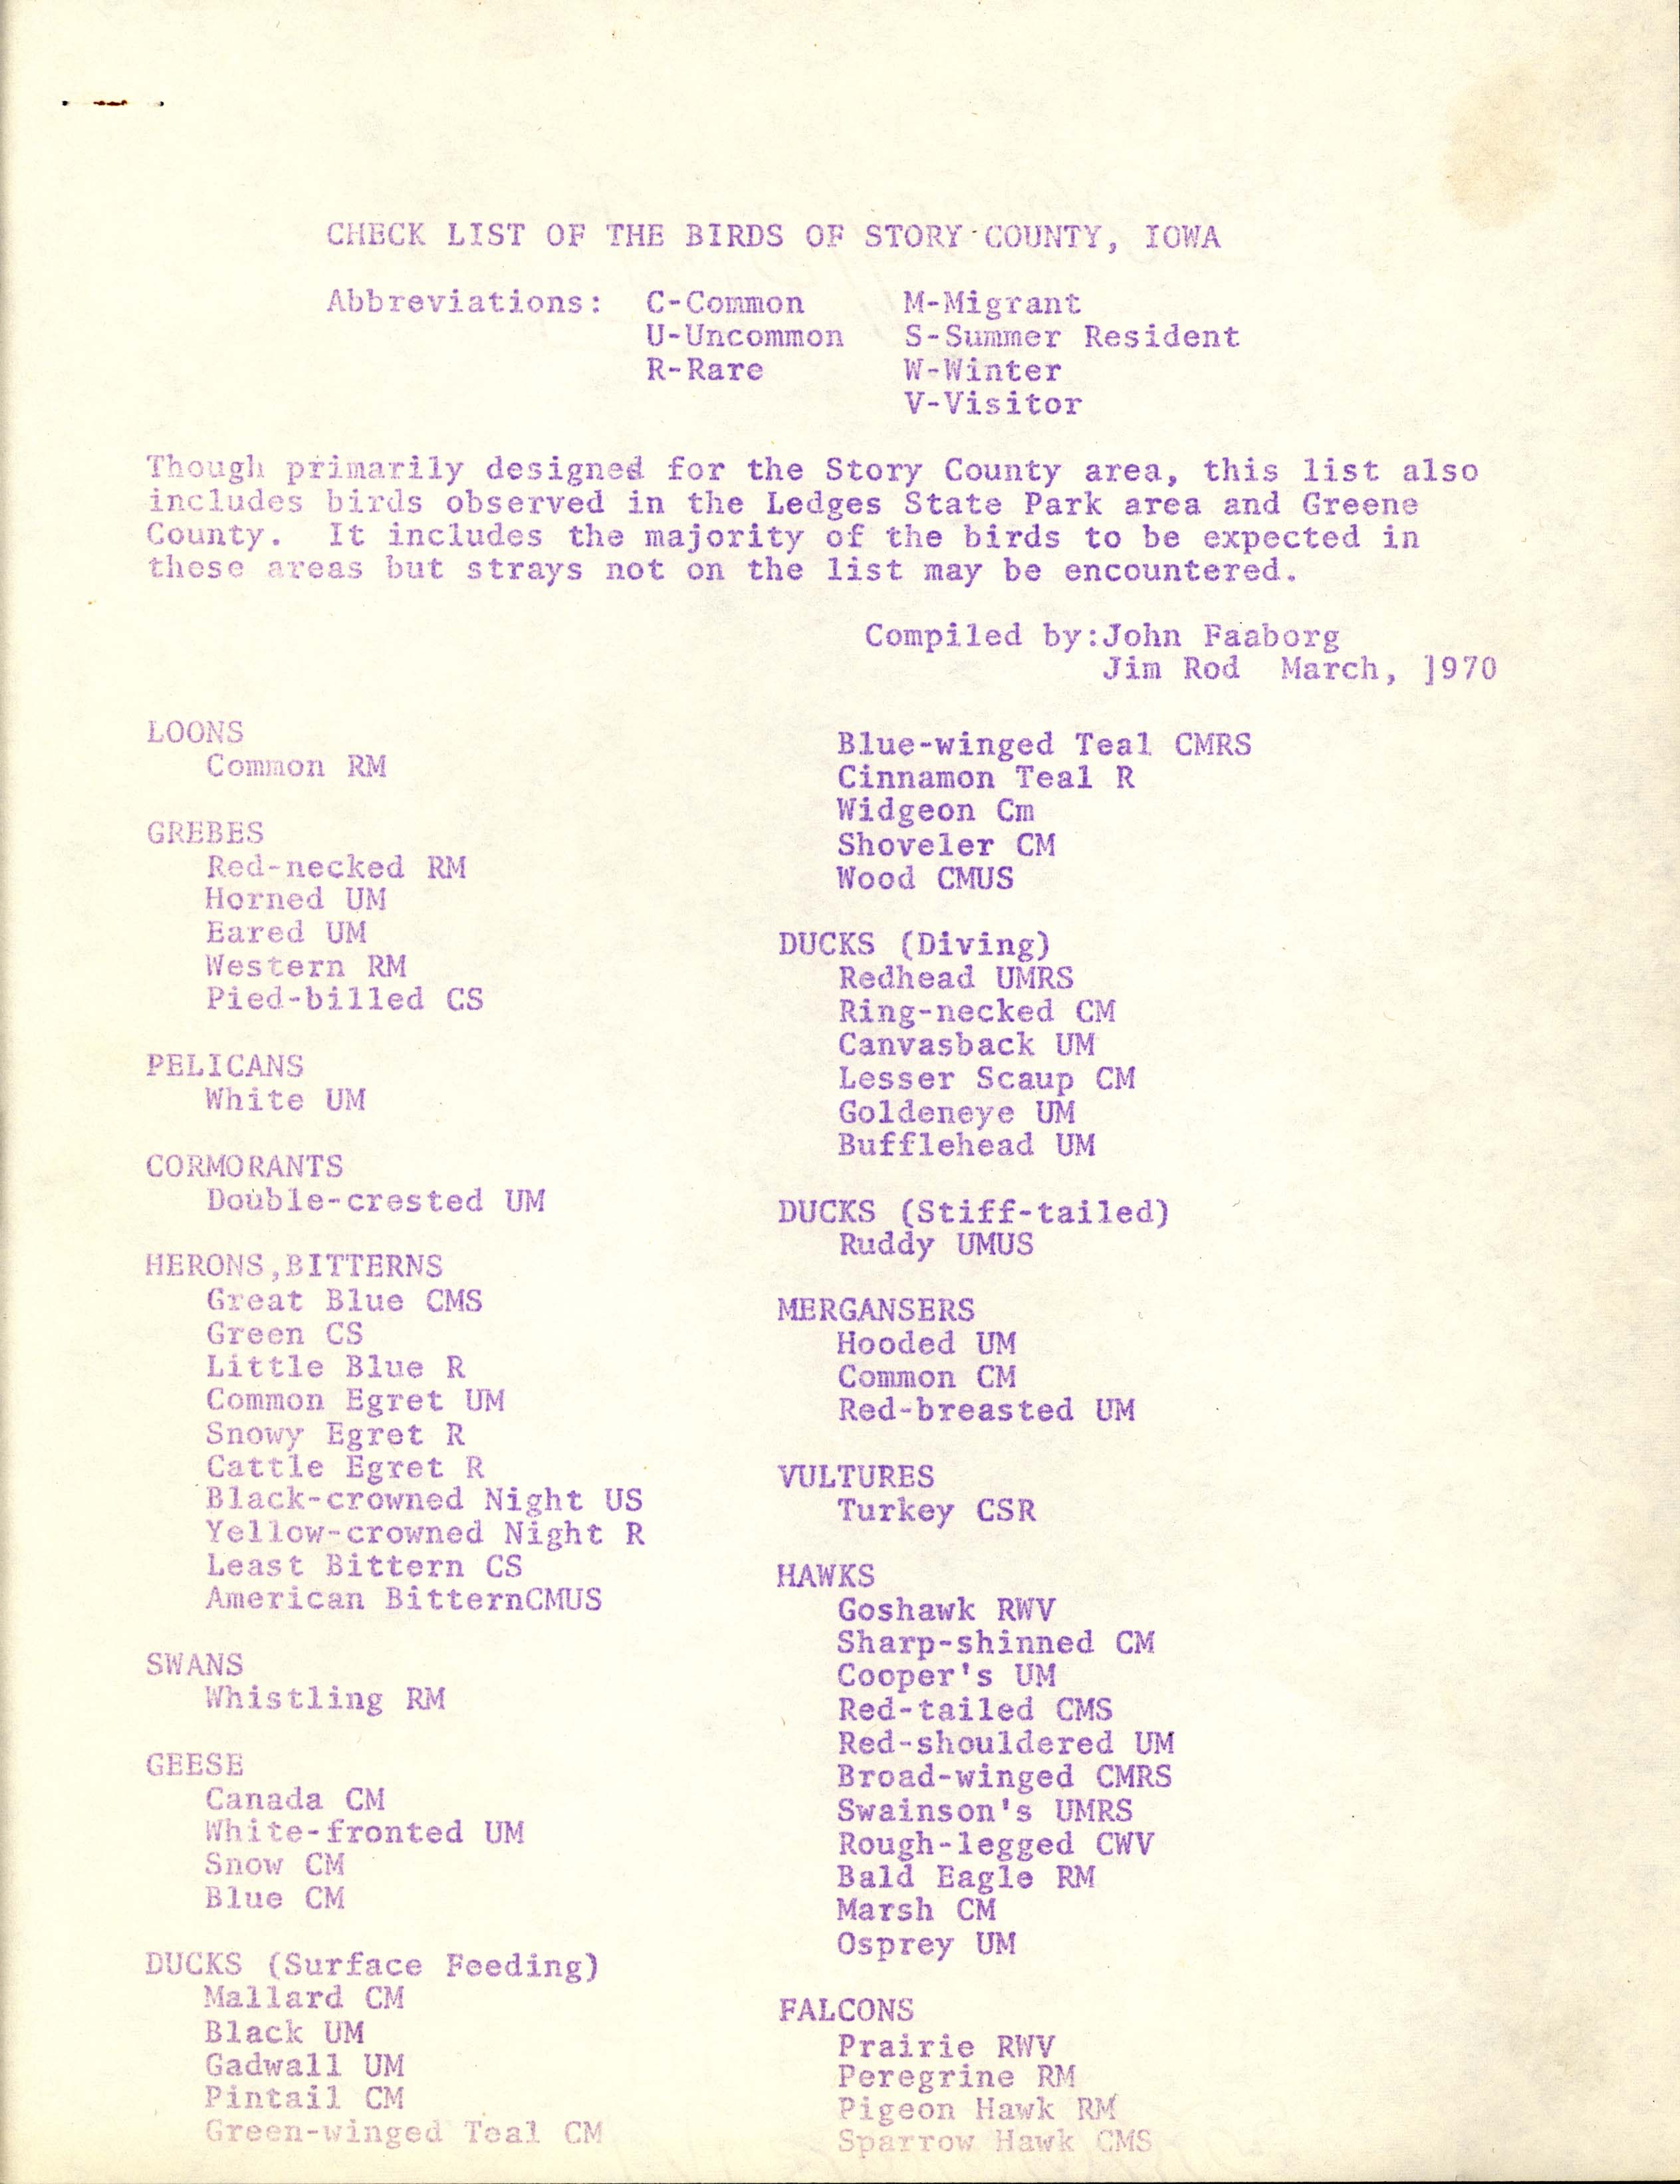 Check list of the birds of Story County, Iowa, 1970